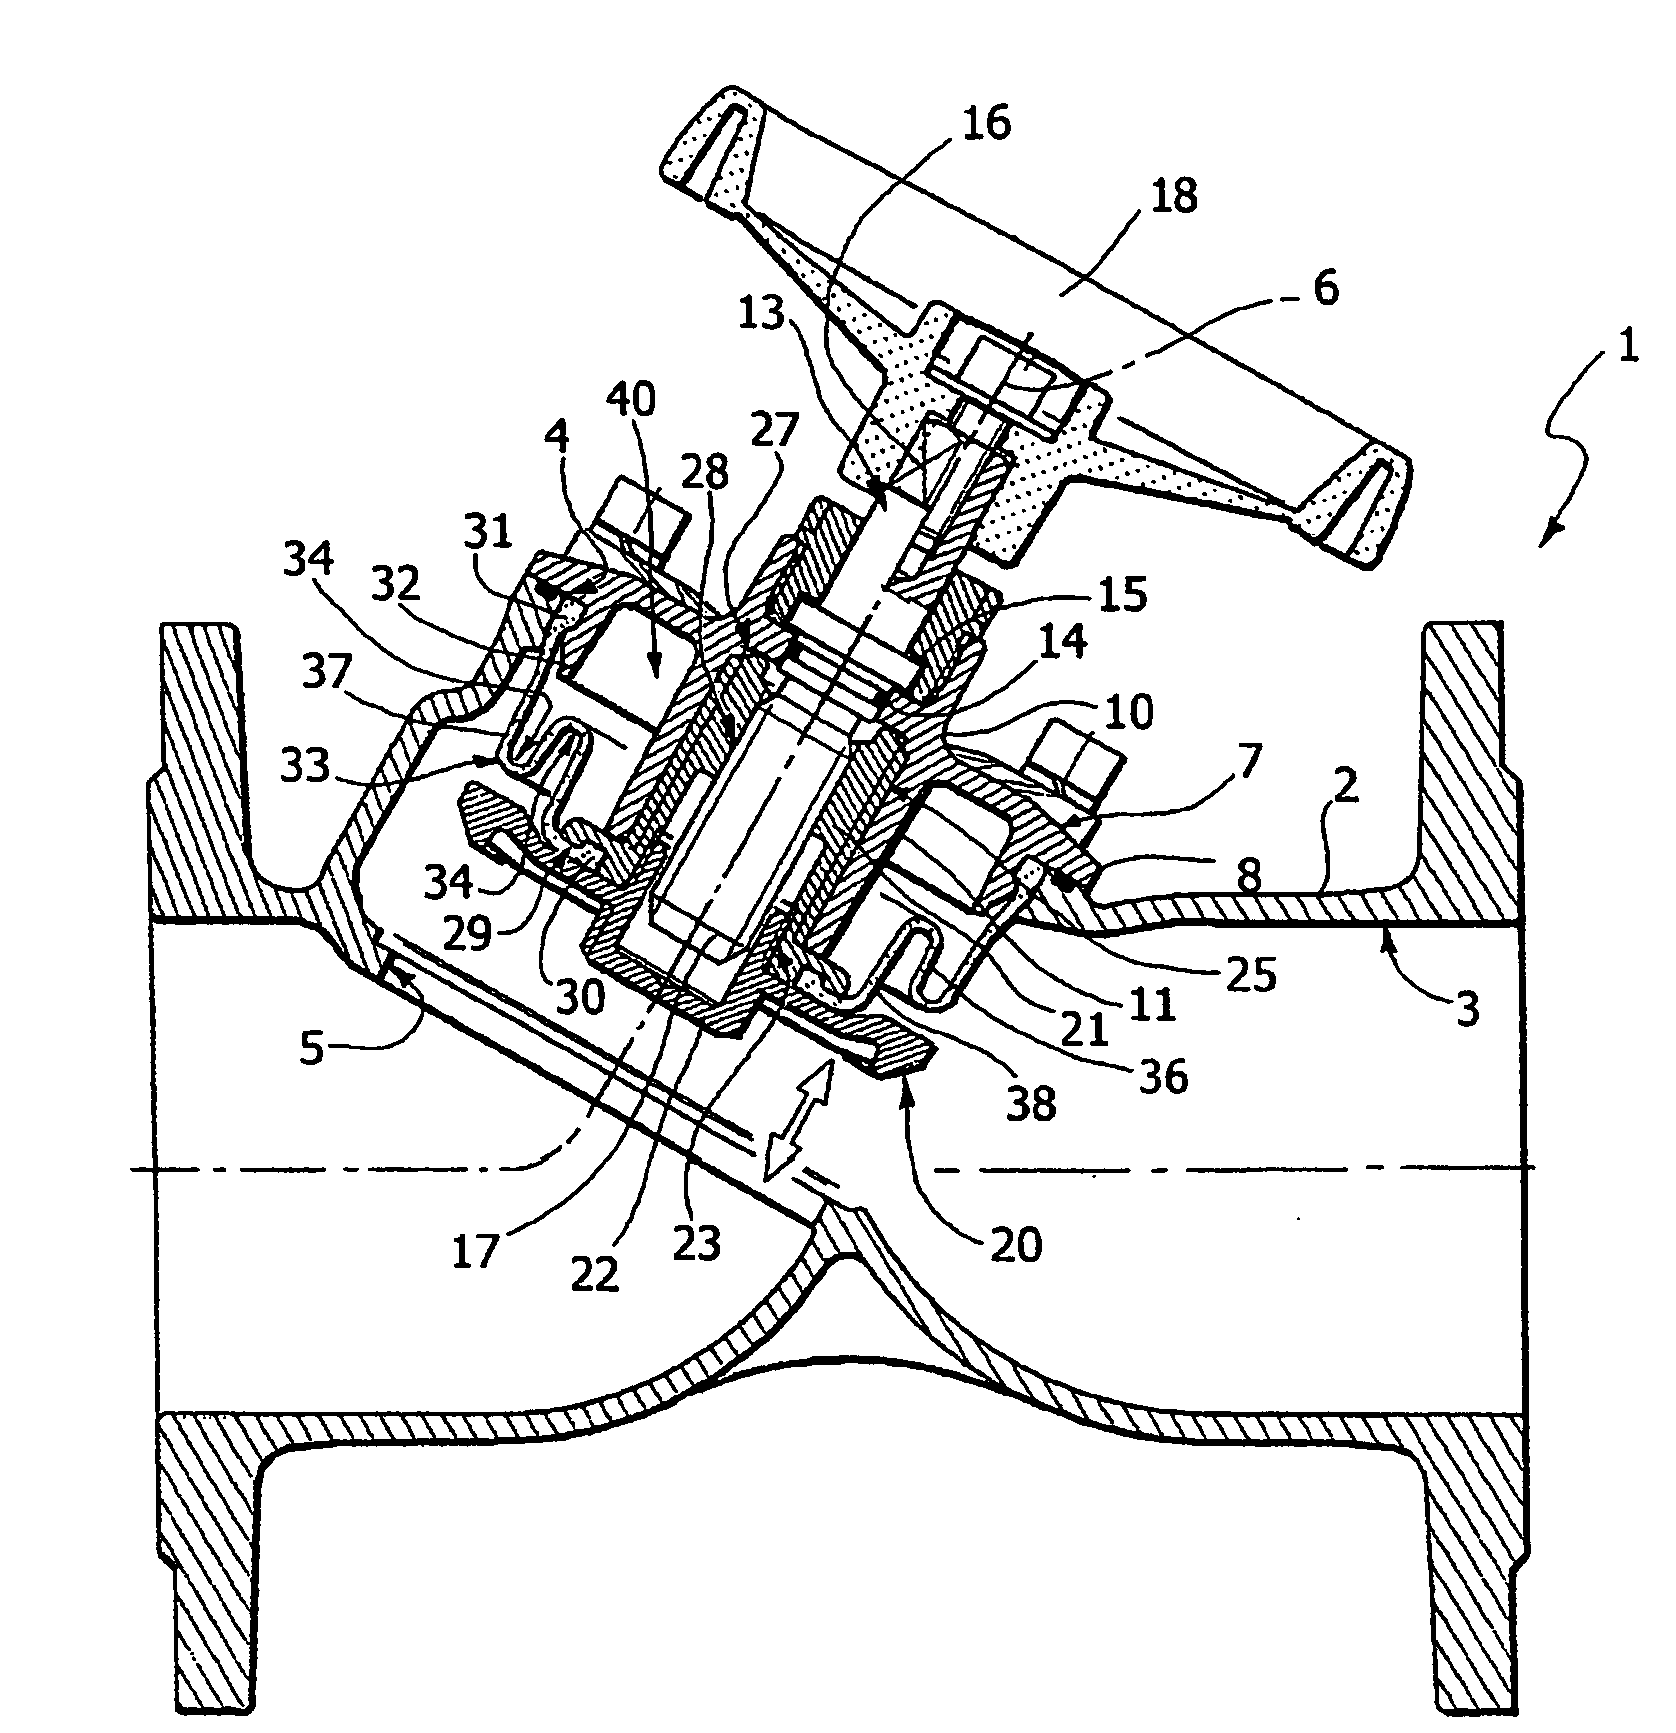 Valve for closing a seawater pipe